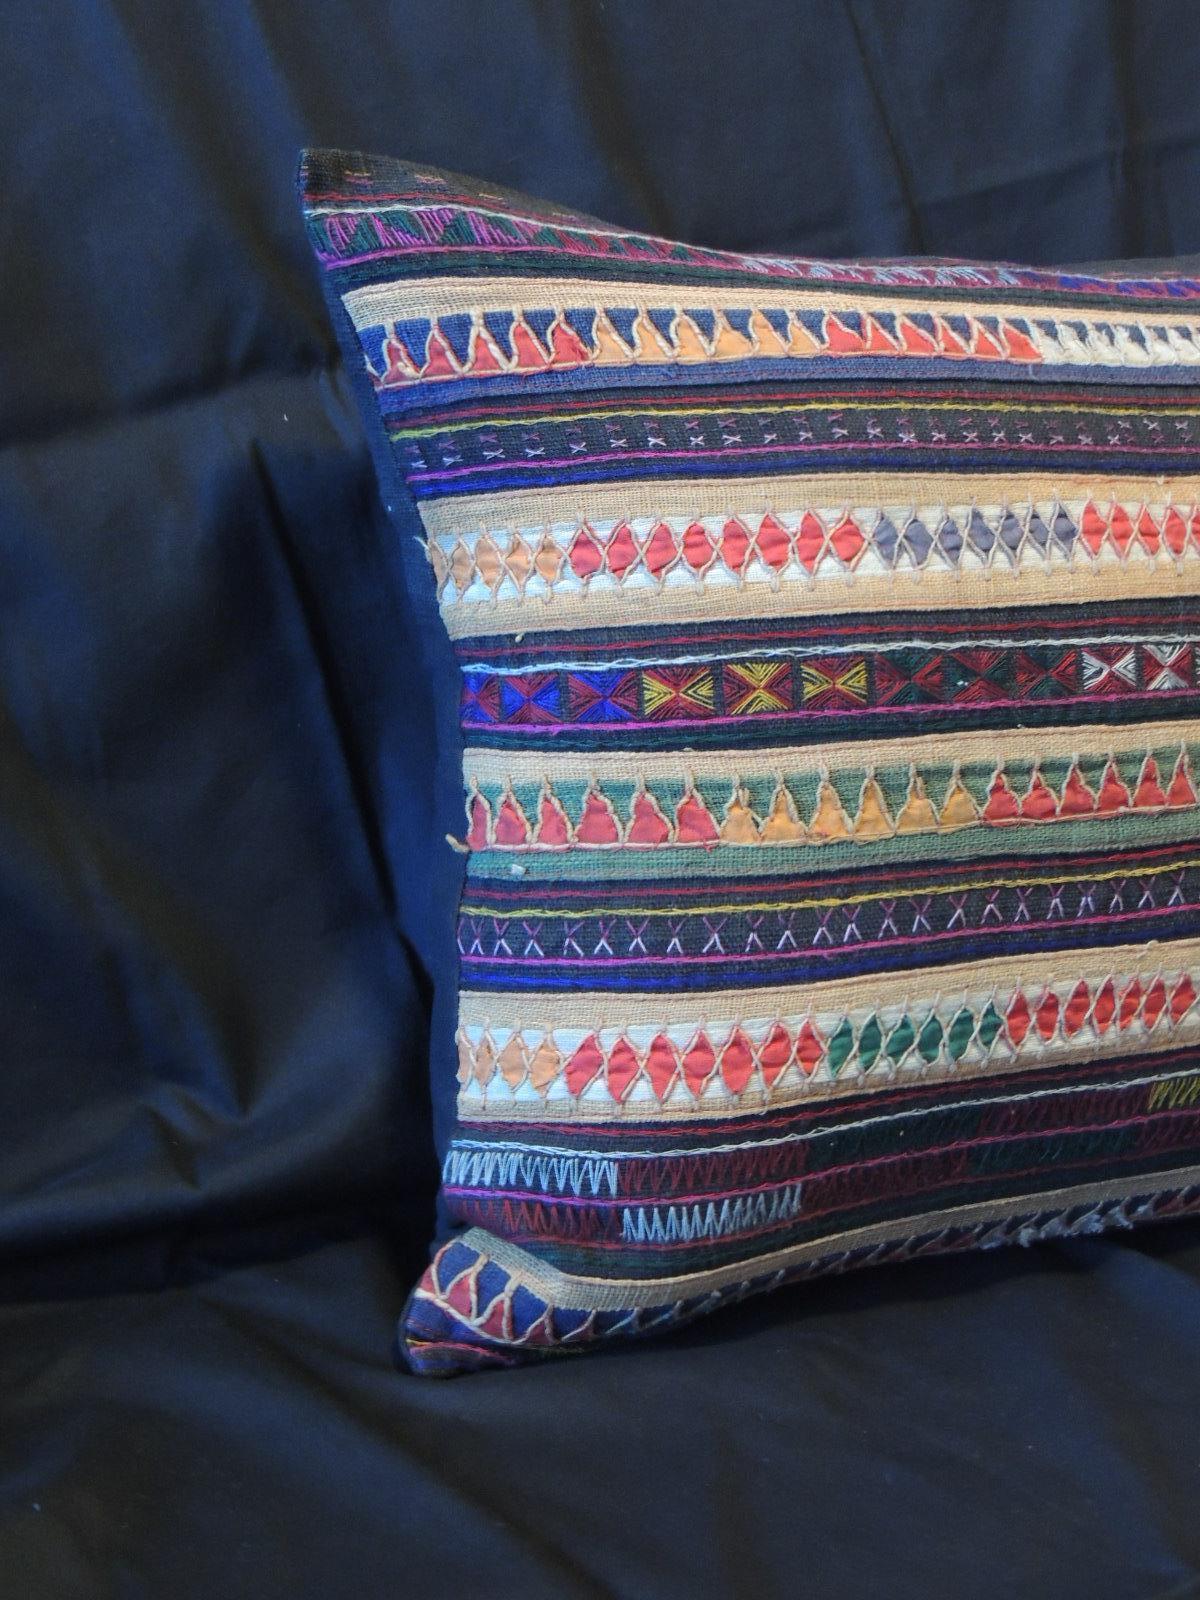 Vintage colorful embroidered Indian silk decorative bolster pillow.
Embroidered and small patchwork pillow with same black raw silk
backing. Zipper closure.
Size: 16 x 19 x 6.